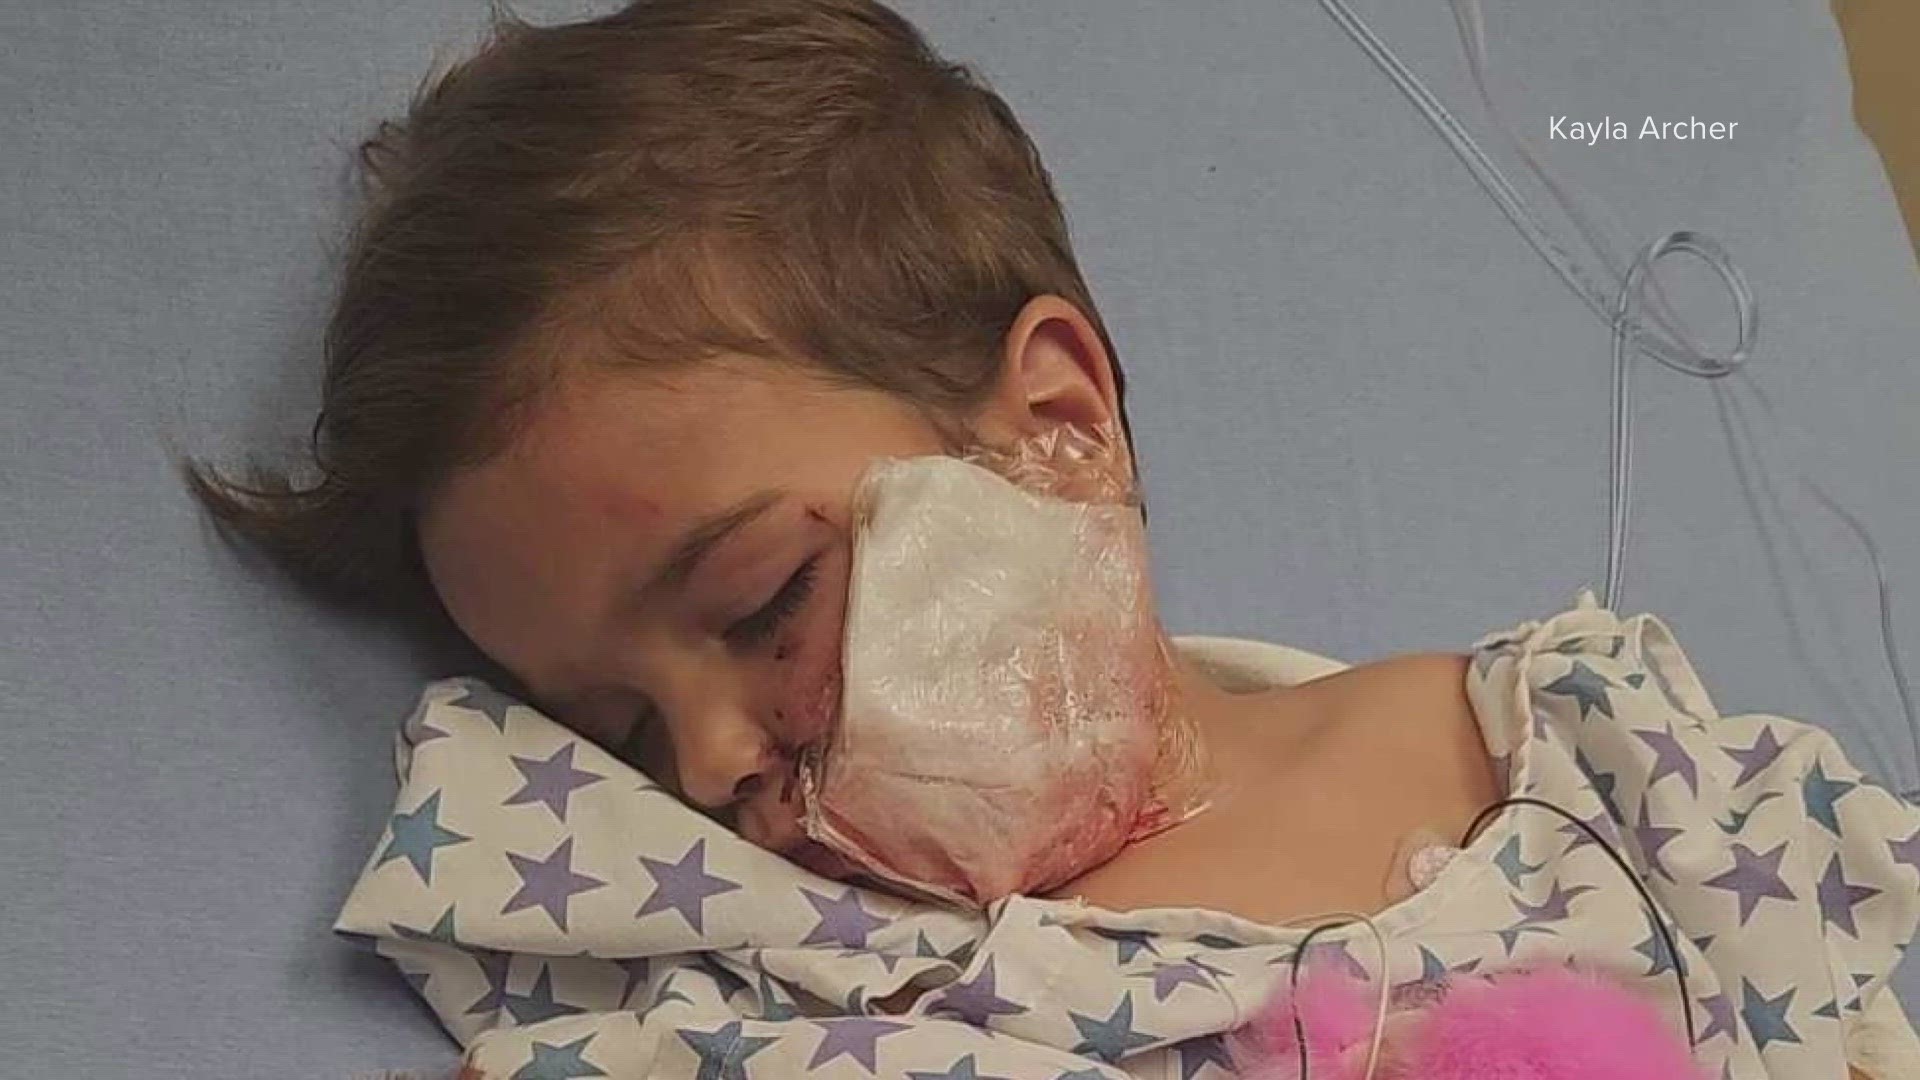 A two-year-old boy underwent surgery for extensive facial injuries after being attacked by a Pitbull.